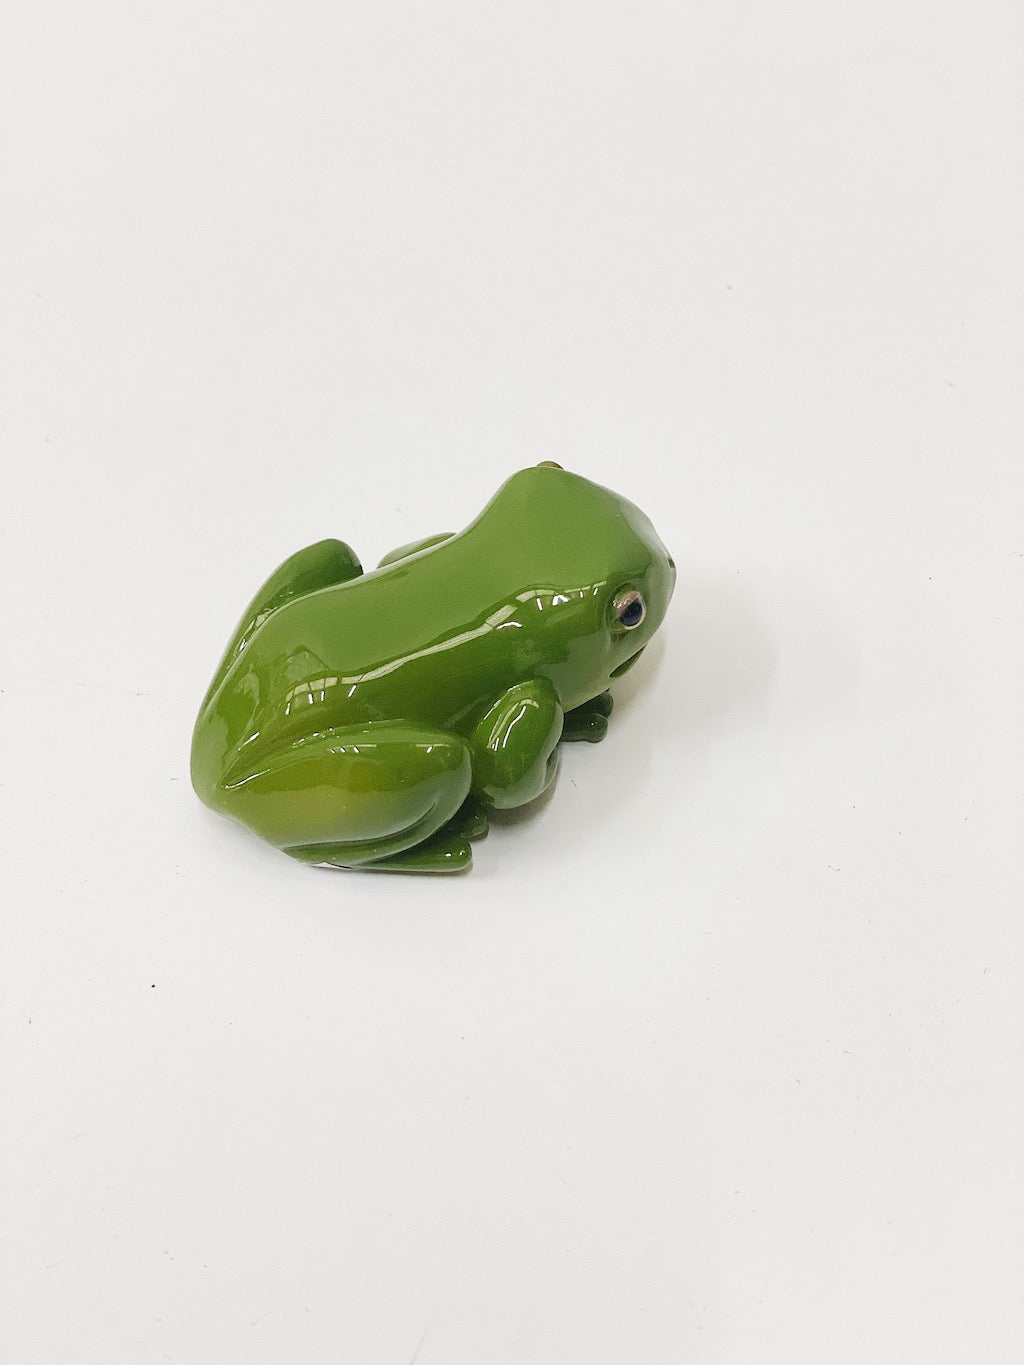 Bring some life to your garden or flower pots with these cute realistic Green Tree Frogs. They will look great placed around your home, garden or in flower pots. Large 8cm Small 5.5cm. Perfect for indoor and outdoor use. Made from Poly Resin. Gloss finish. Shop online. AfterPay available. Australia wide Shipping | Bliss Gifts &amp; Homewares - Unit 8, 259 Princes Hwy Ulladulla - 0427795959, 44541523 